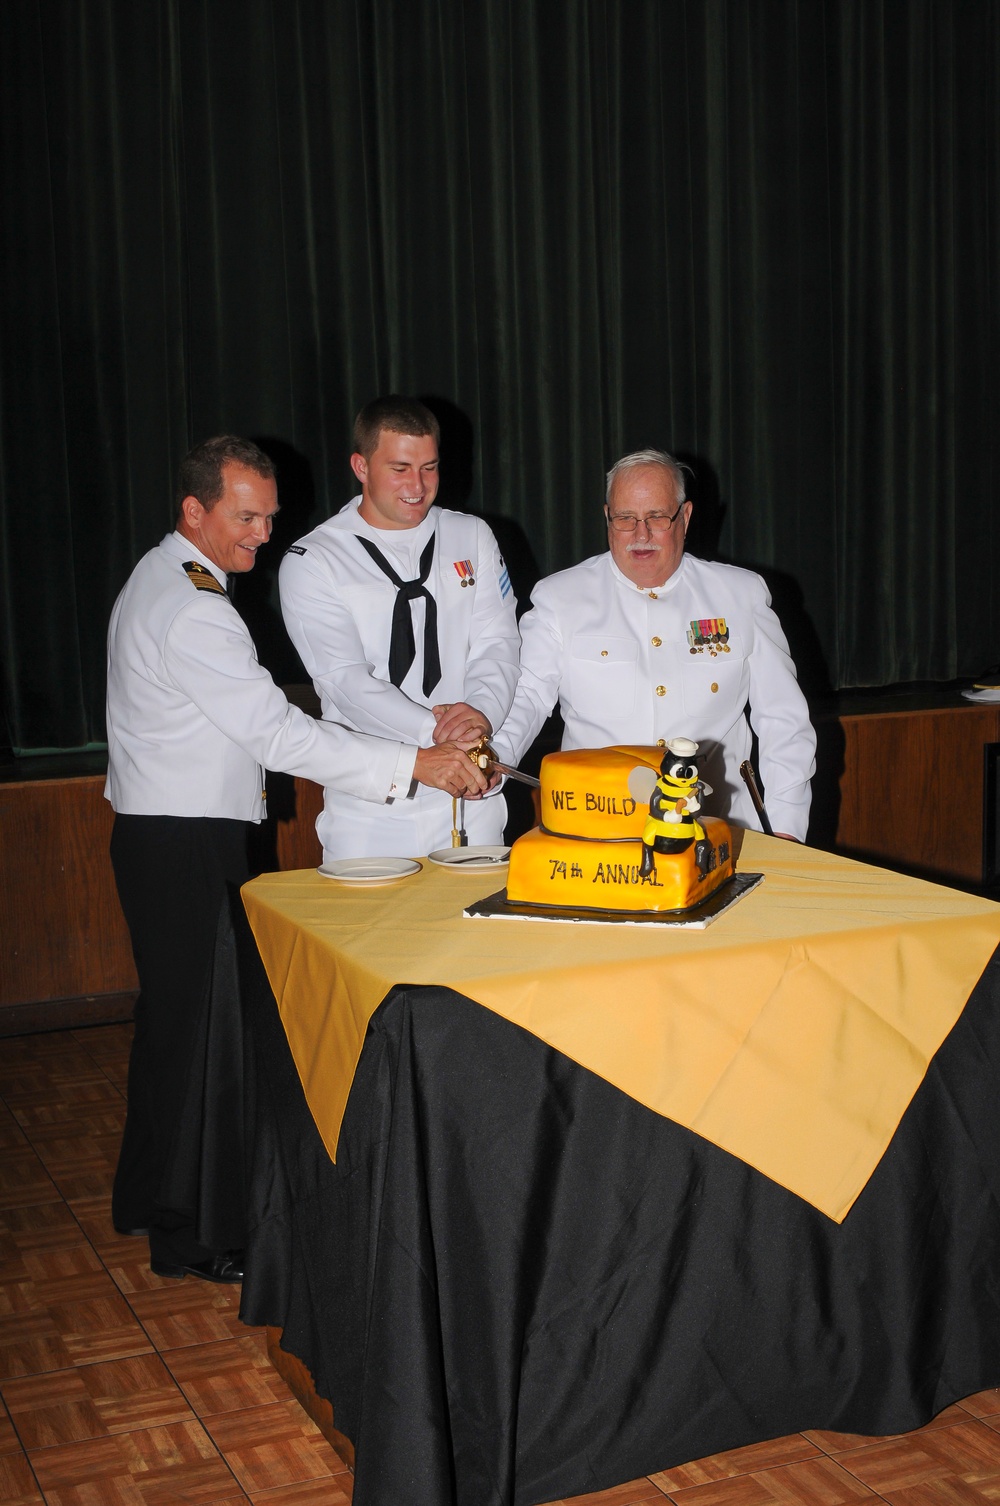 Built to last: Seabees celebrate 74 years in style